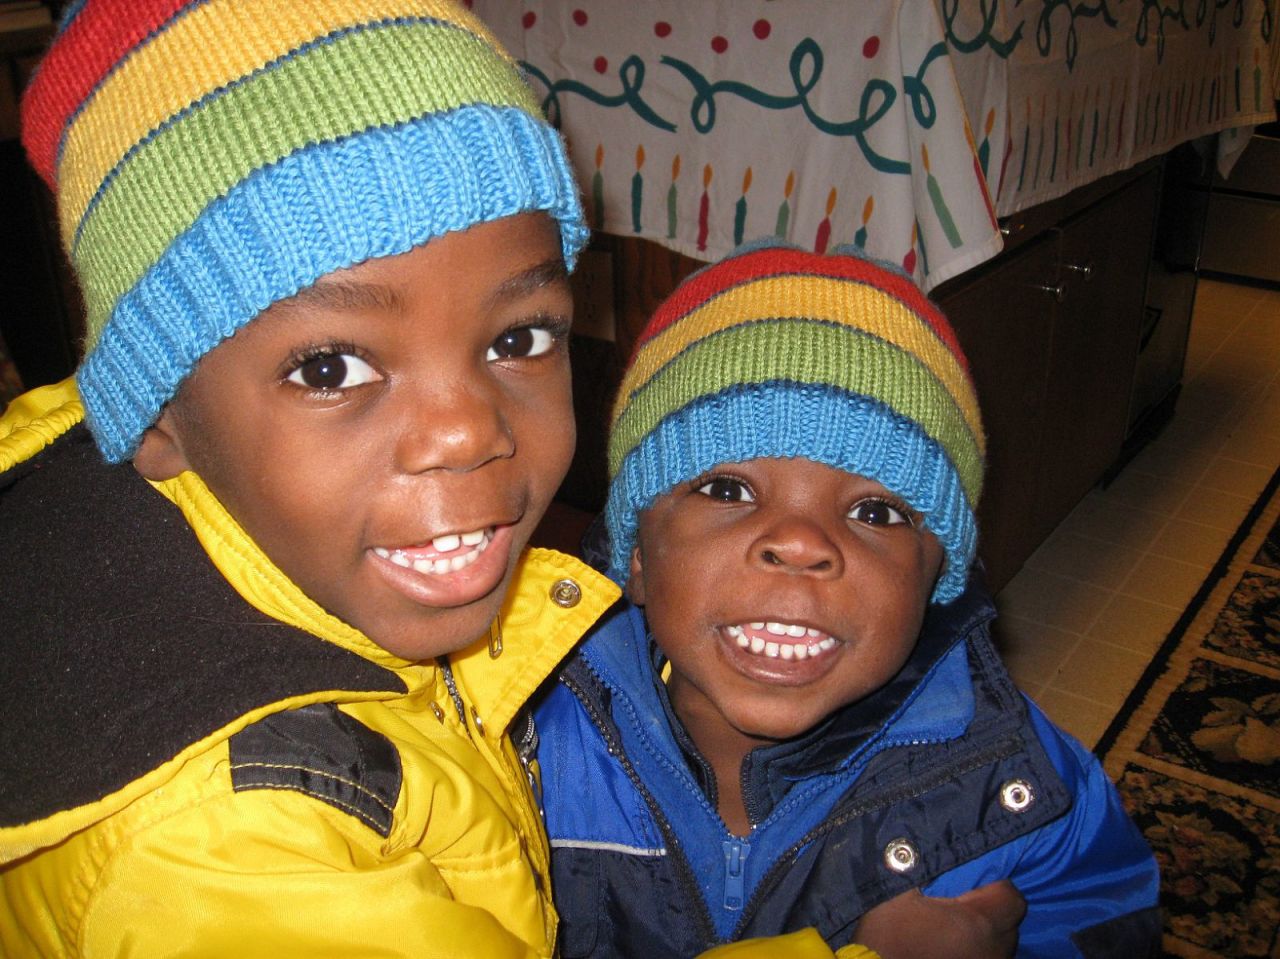 Brothers Zach, right and Philip were born in poverty in Uganda but are now living with their adopted family in the U.S.